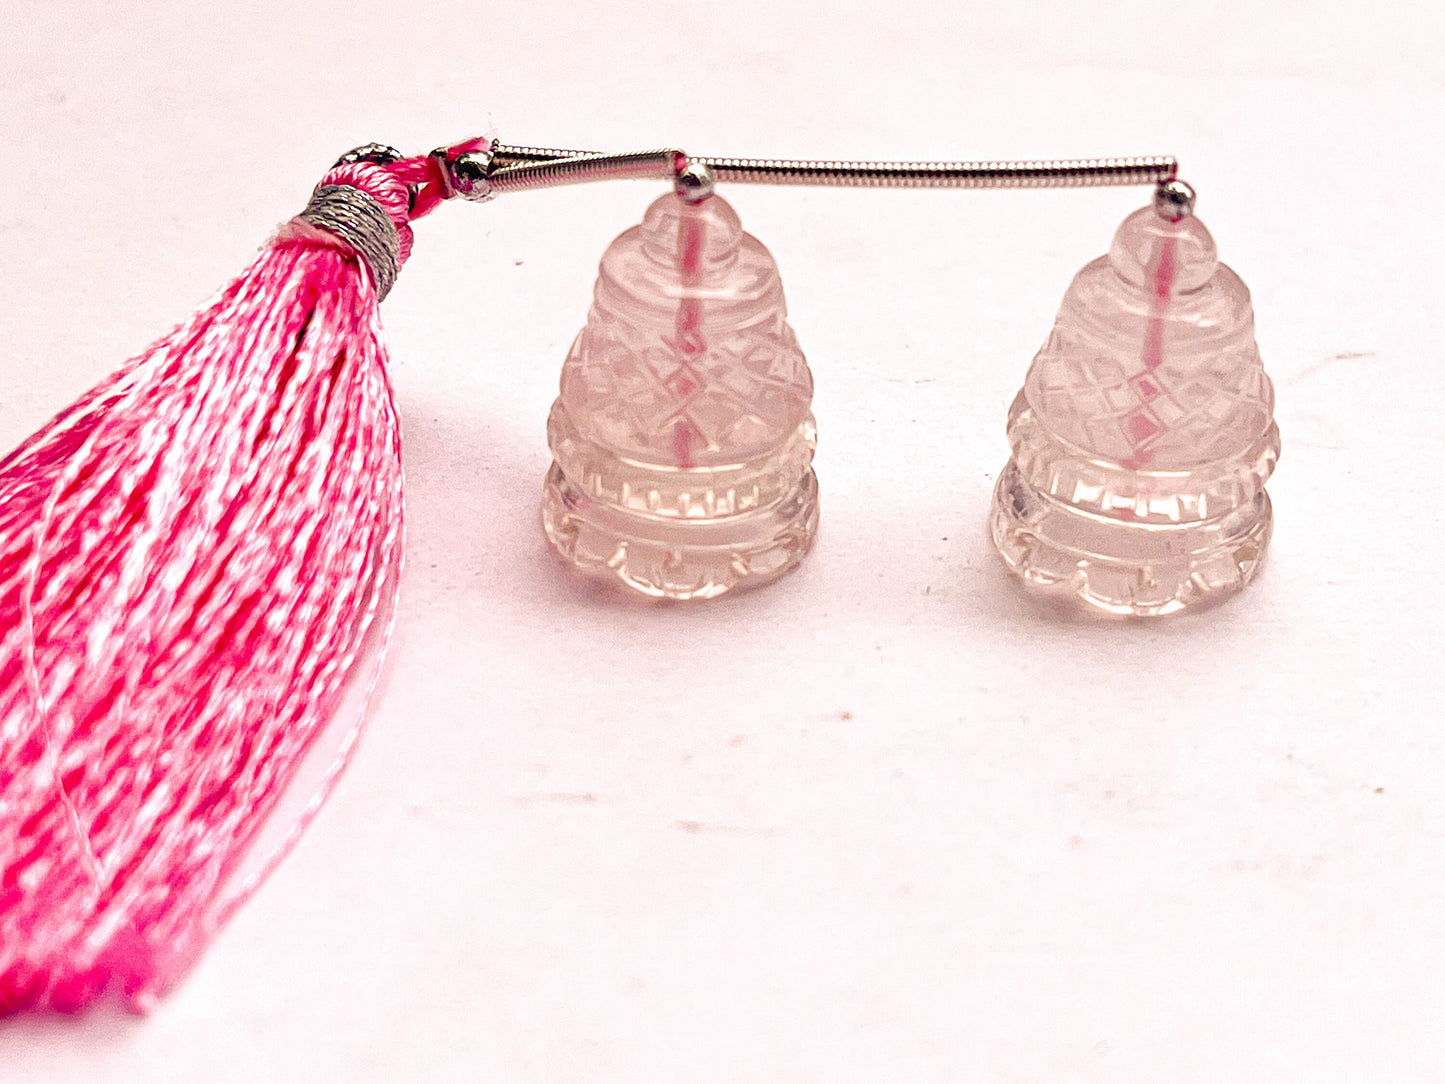 Rose Quartz Carving Bell Shape Pair, Beautiful! Carving Work in Natural Rose Quartz Gemstone for Earring's, 13x17MM, 2 Pieces